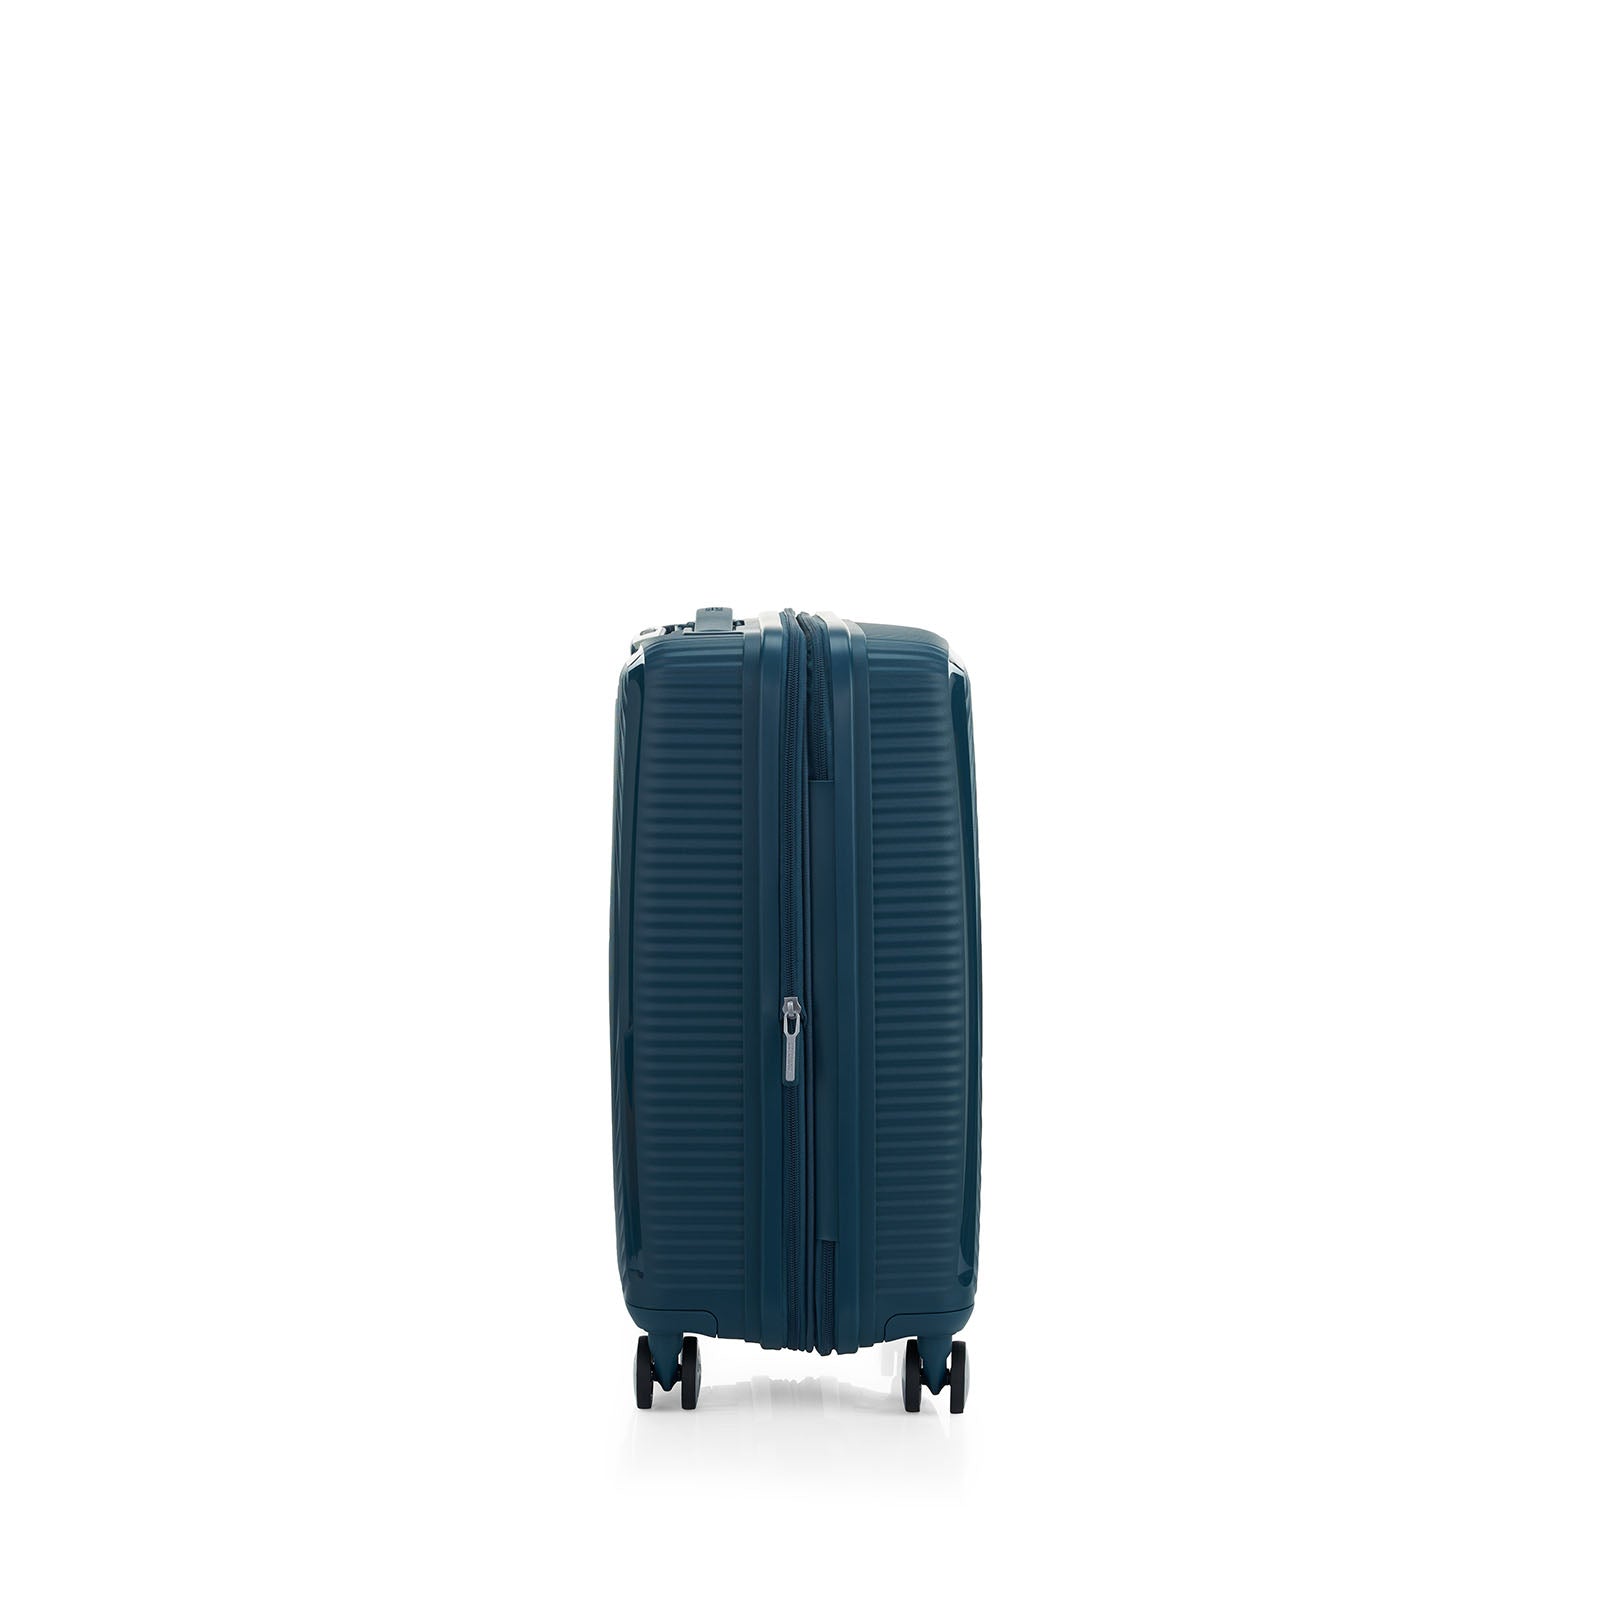 American-Tourister-Curio-2-55cm-Carry-On-Suitcase-Varisty-Green-Side